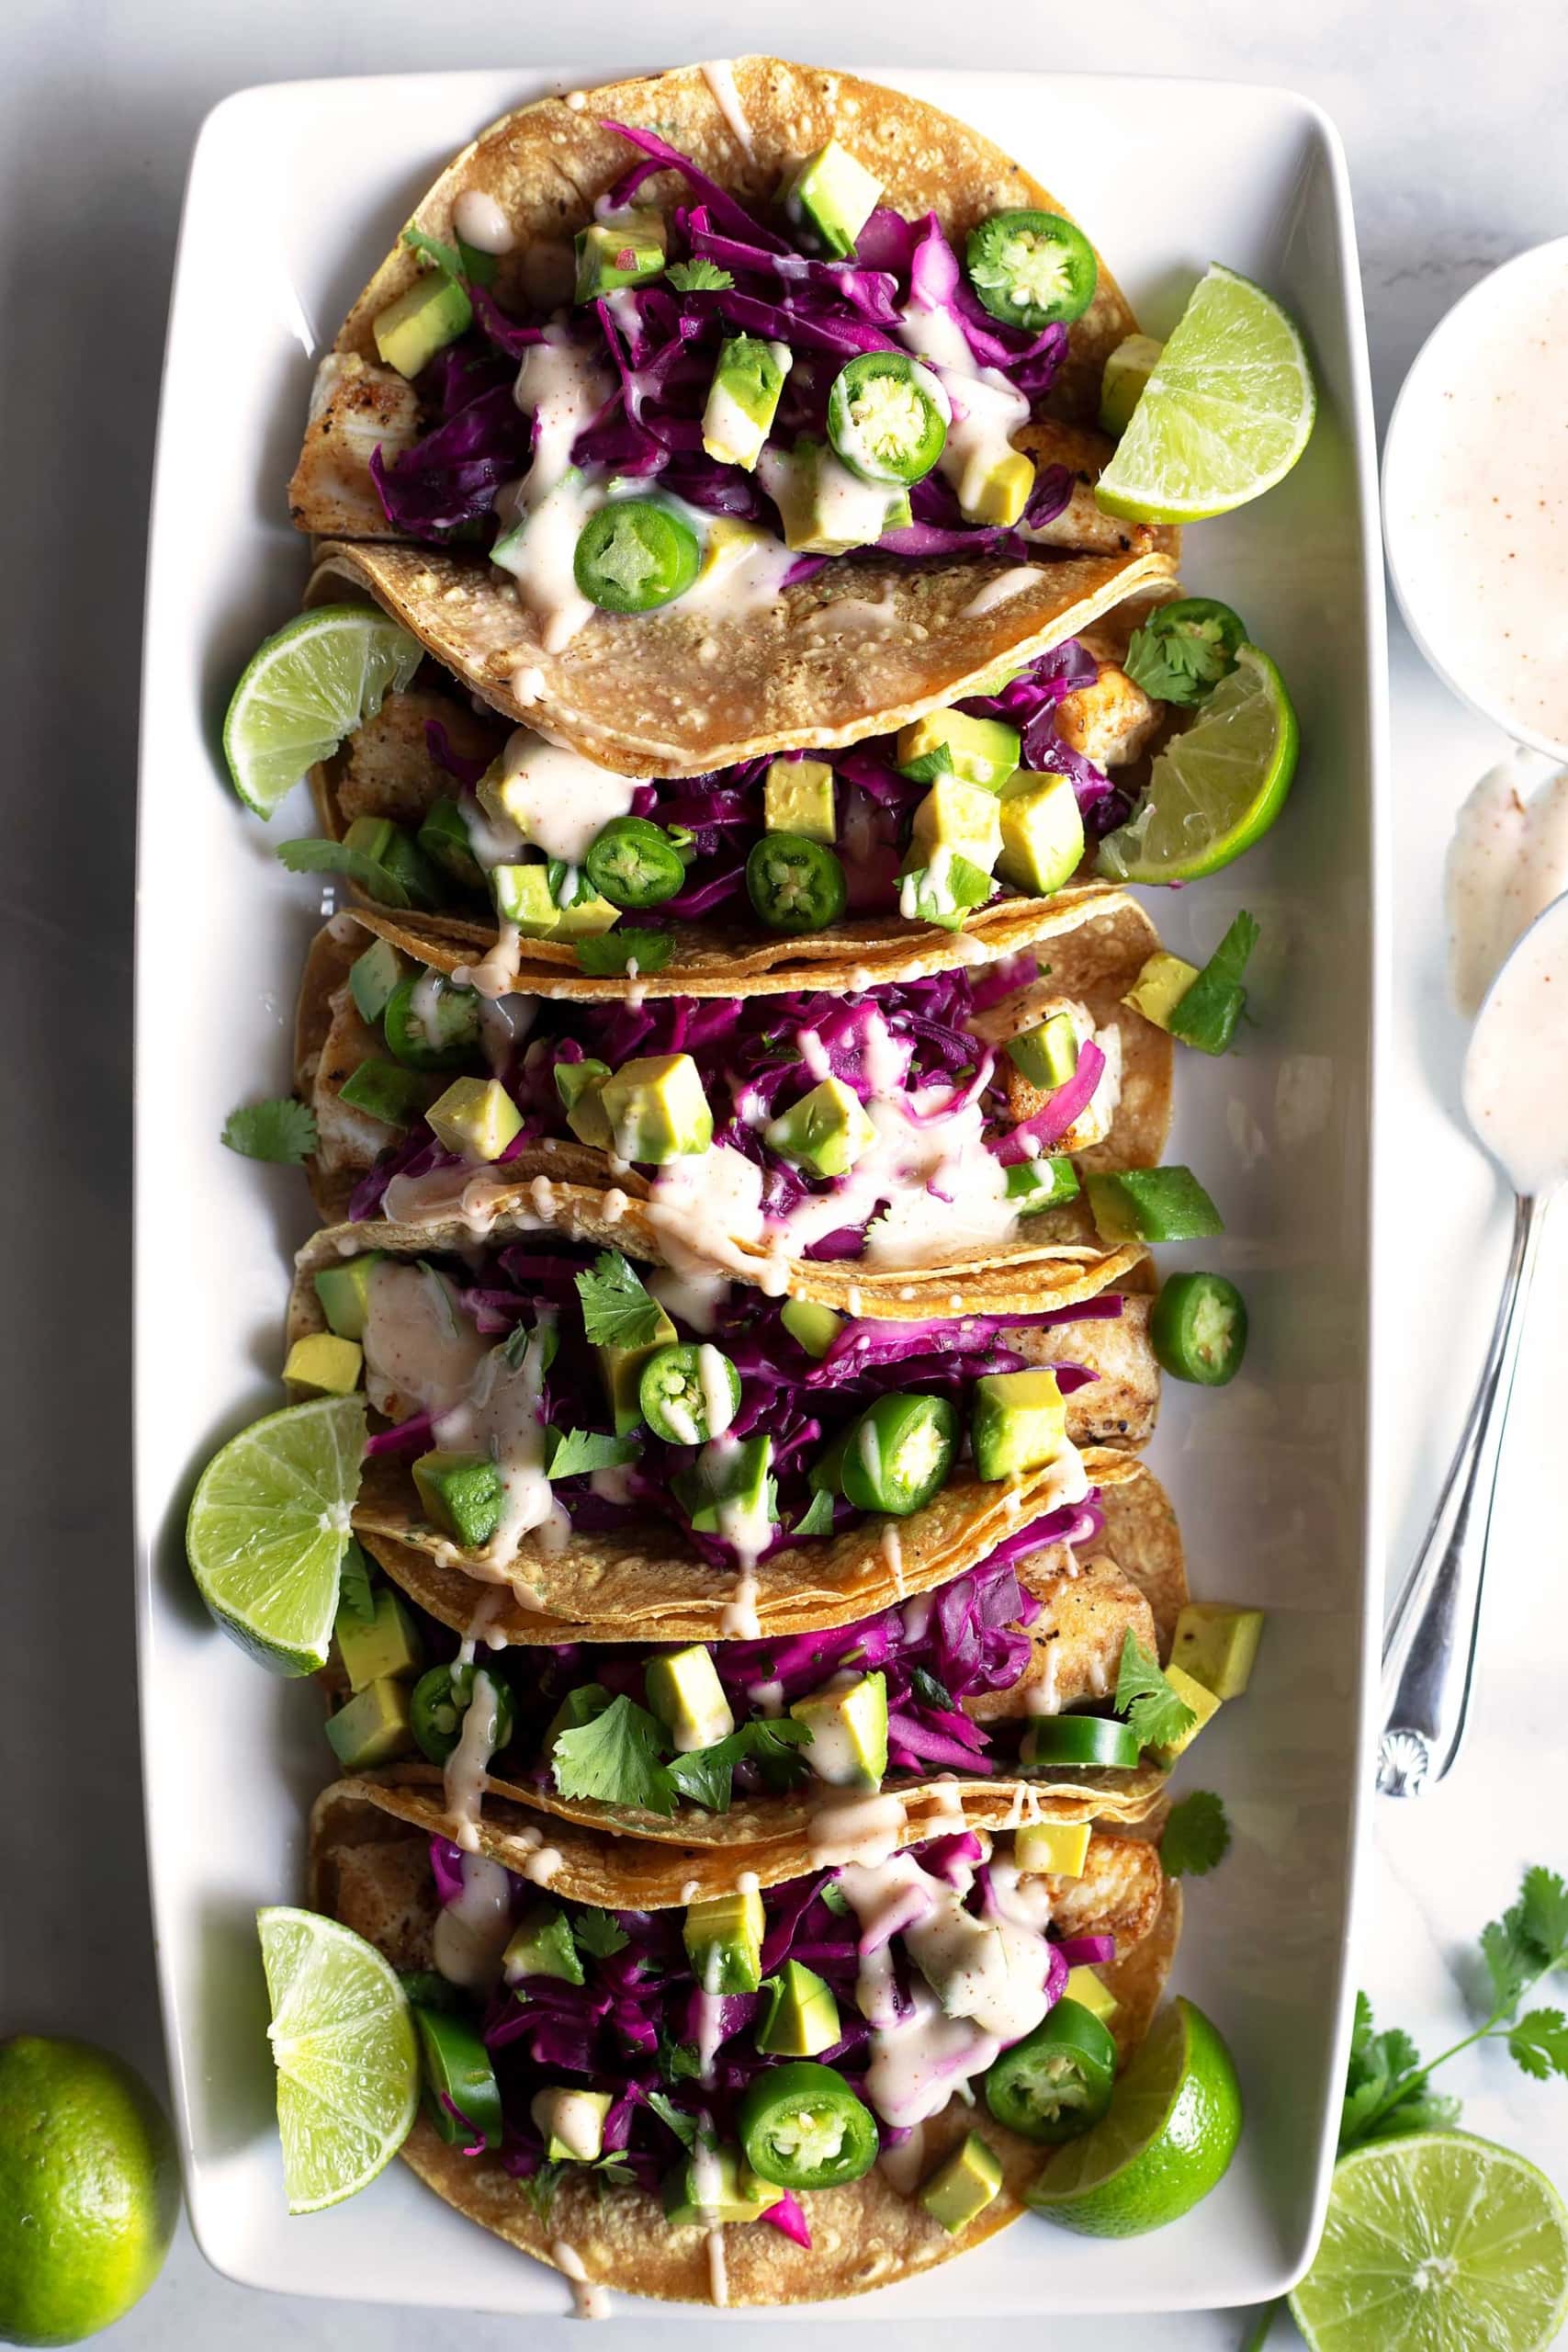 Baja Fish Tacos with Chipotle Lime Crema - Kit's Kitchen